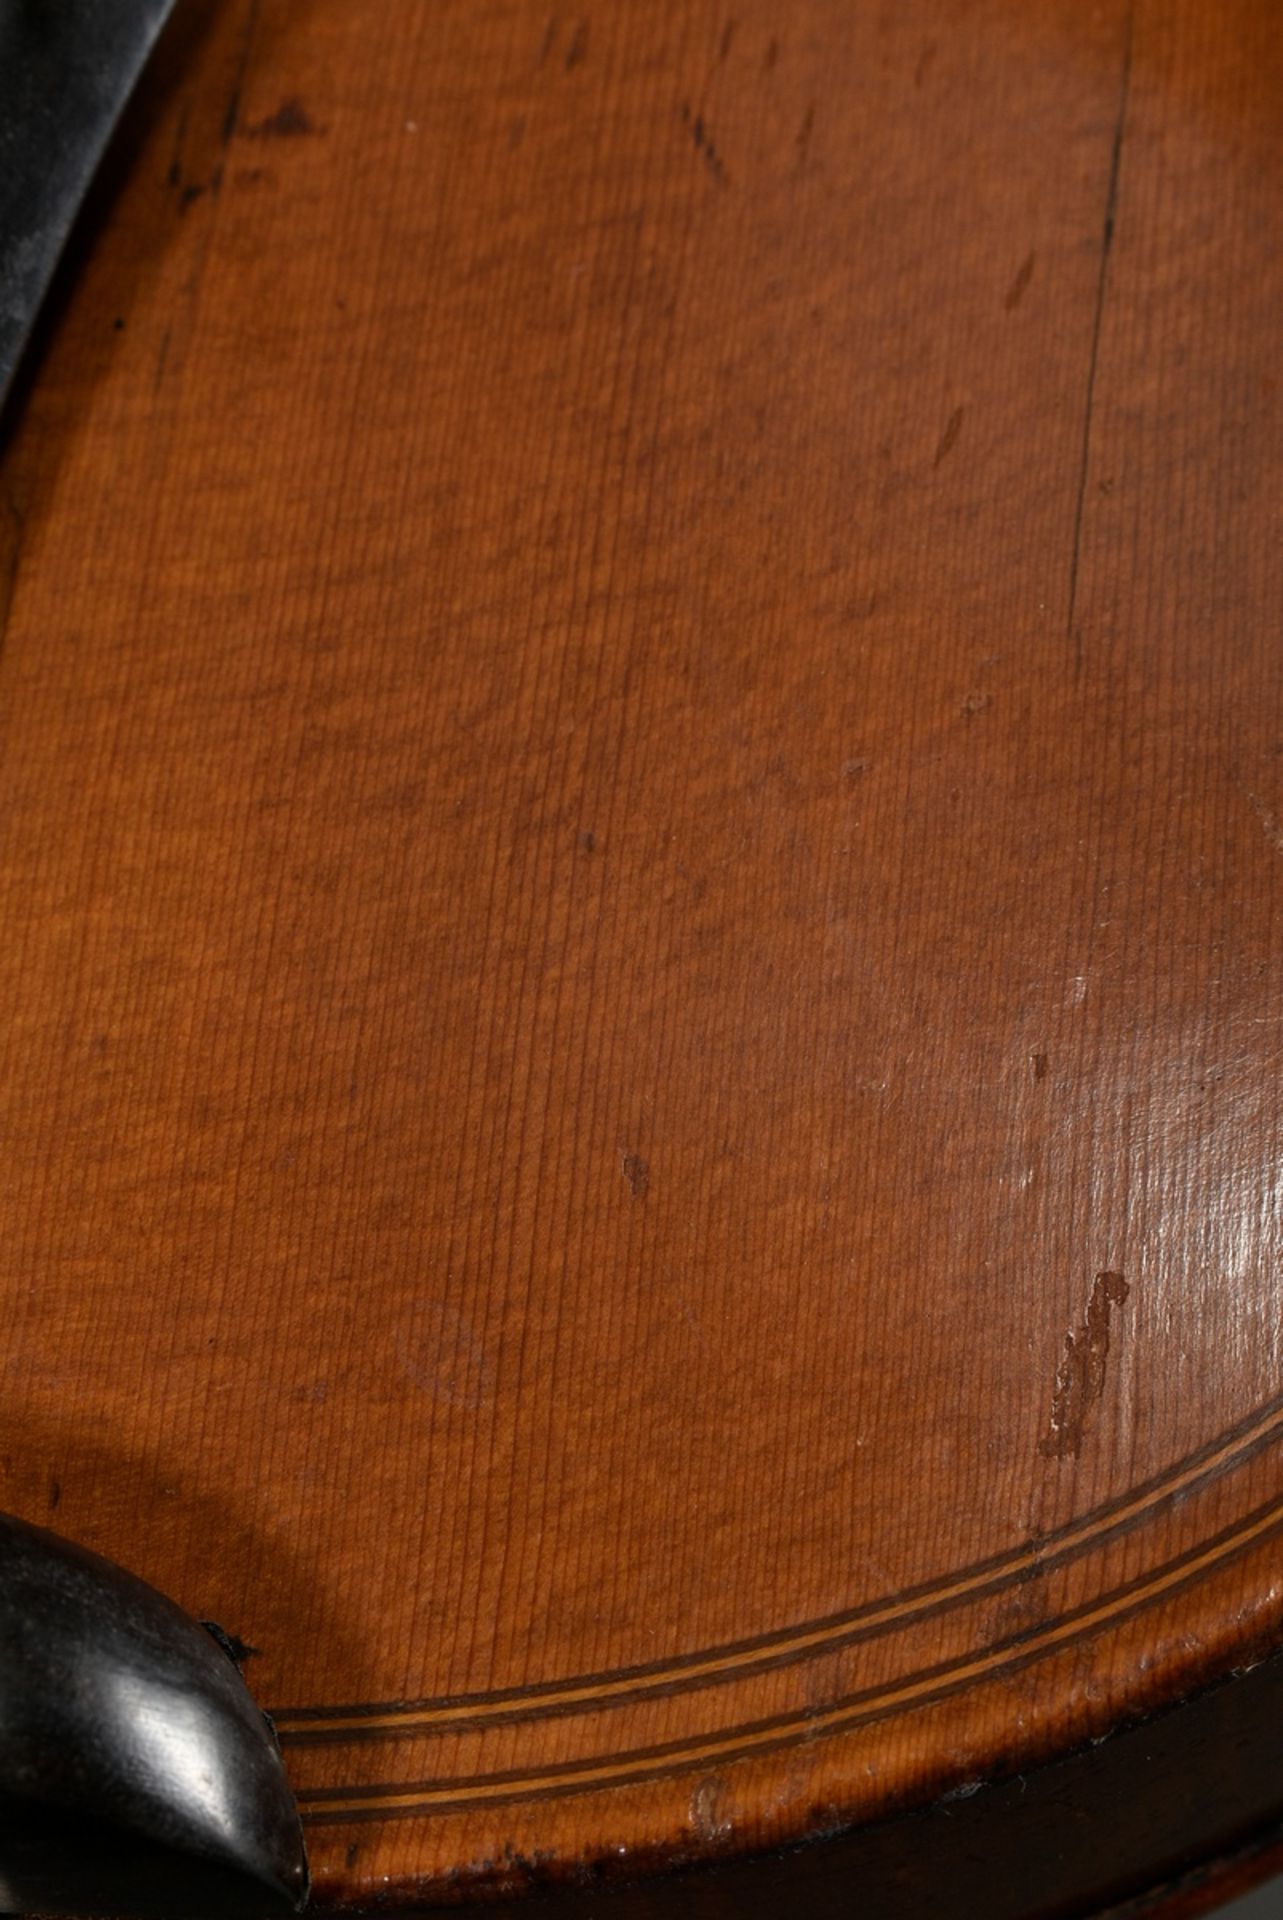 Elegant violin after Maggini, German 19th c., fine-grained spruce top, two-piece beautifully flamed - Image 13 of 16